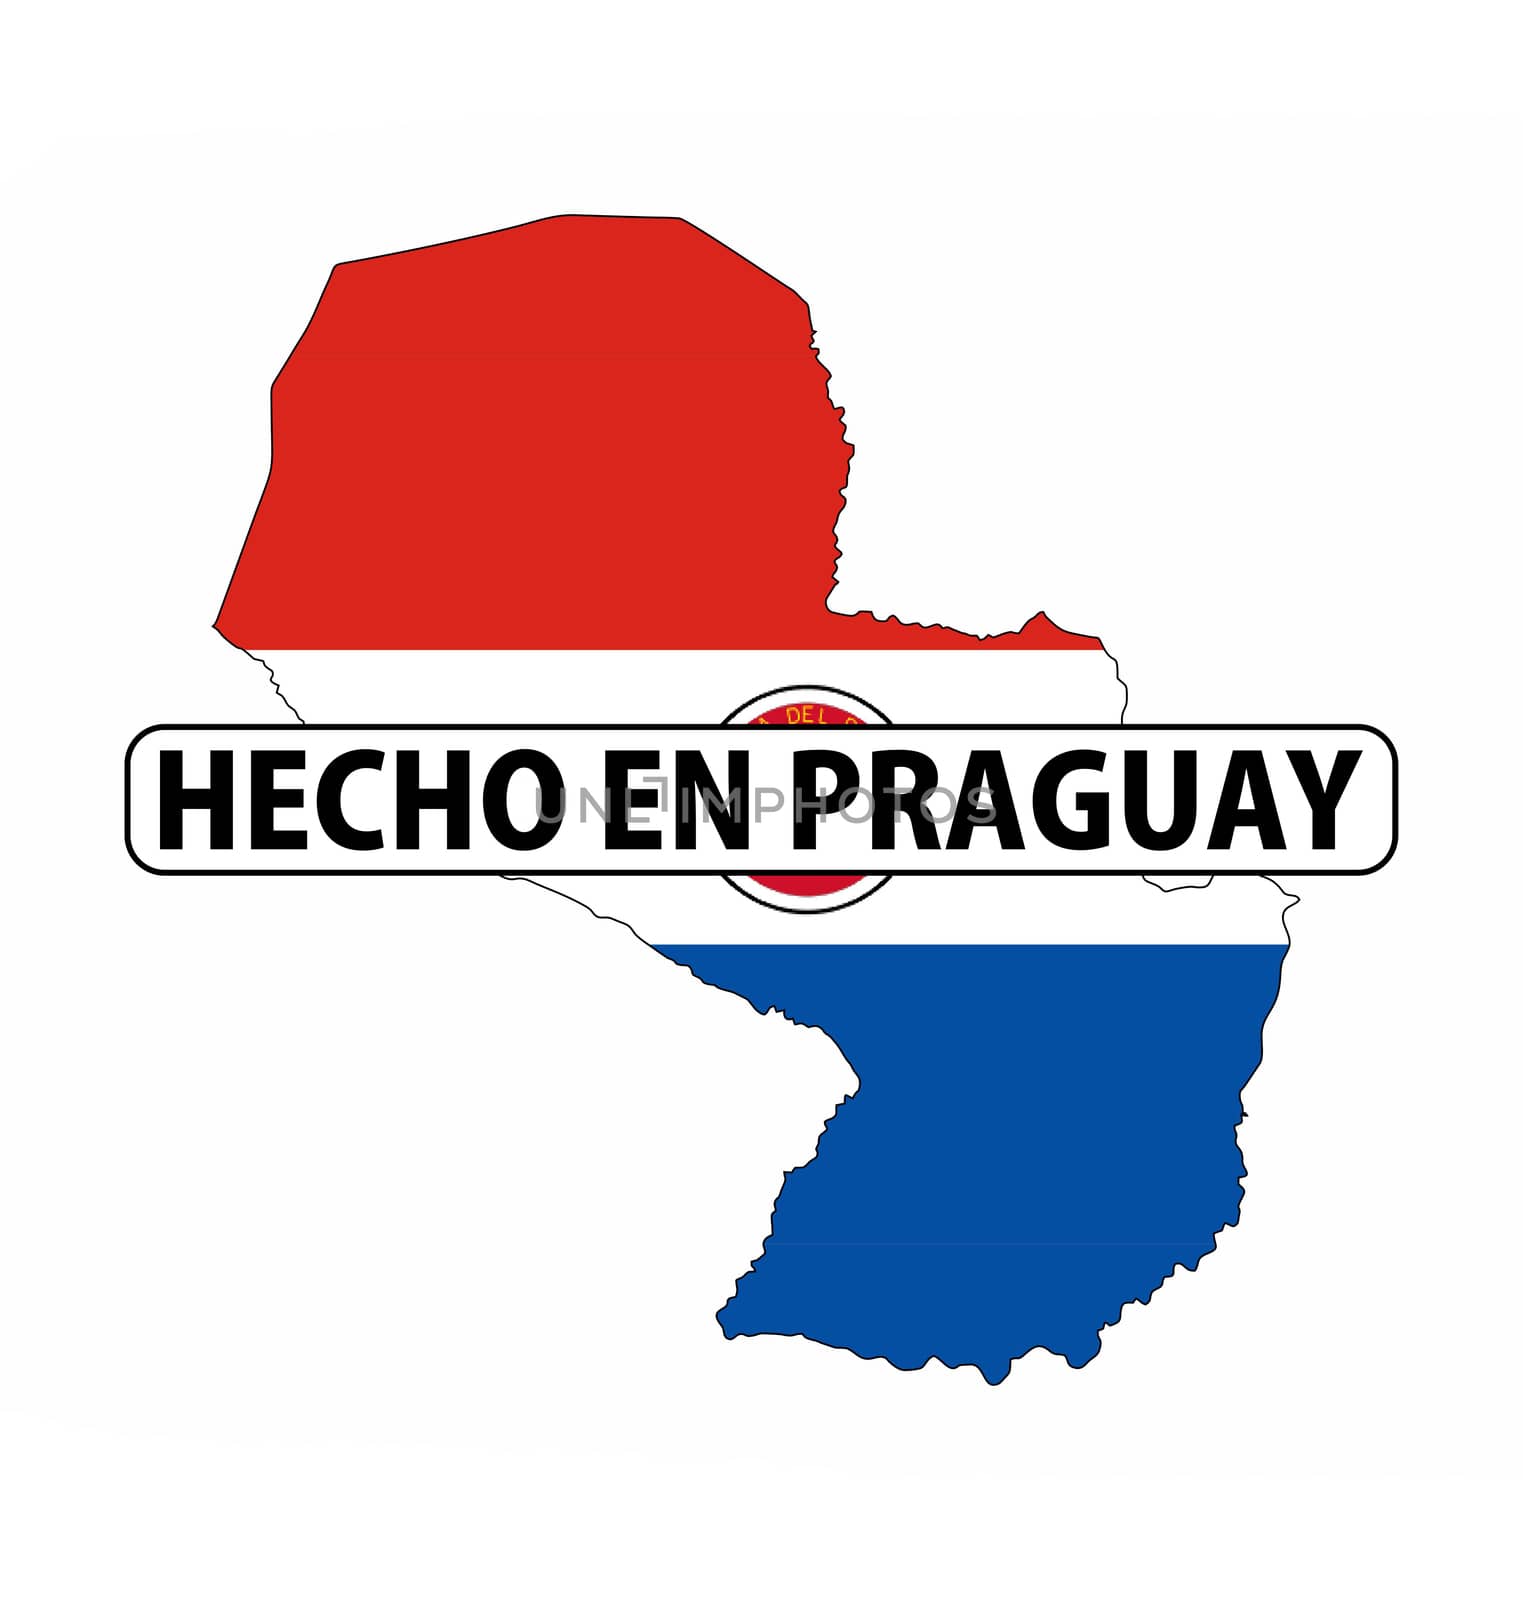 made in paraguay by tony4urban